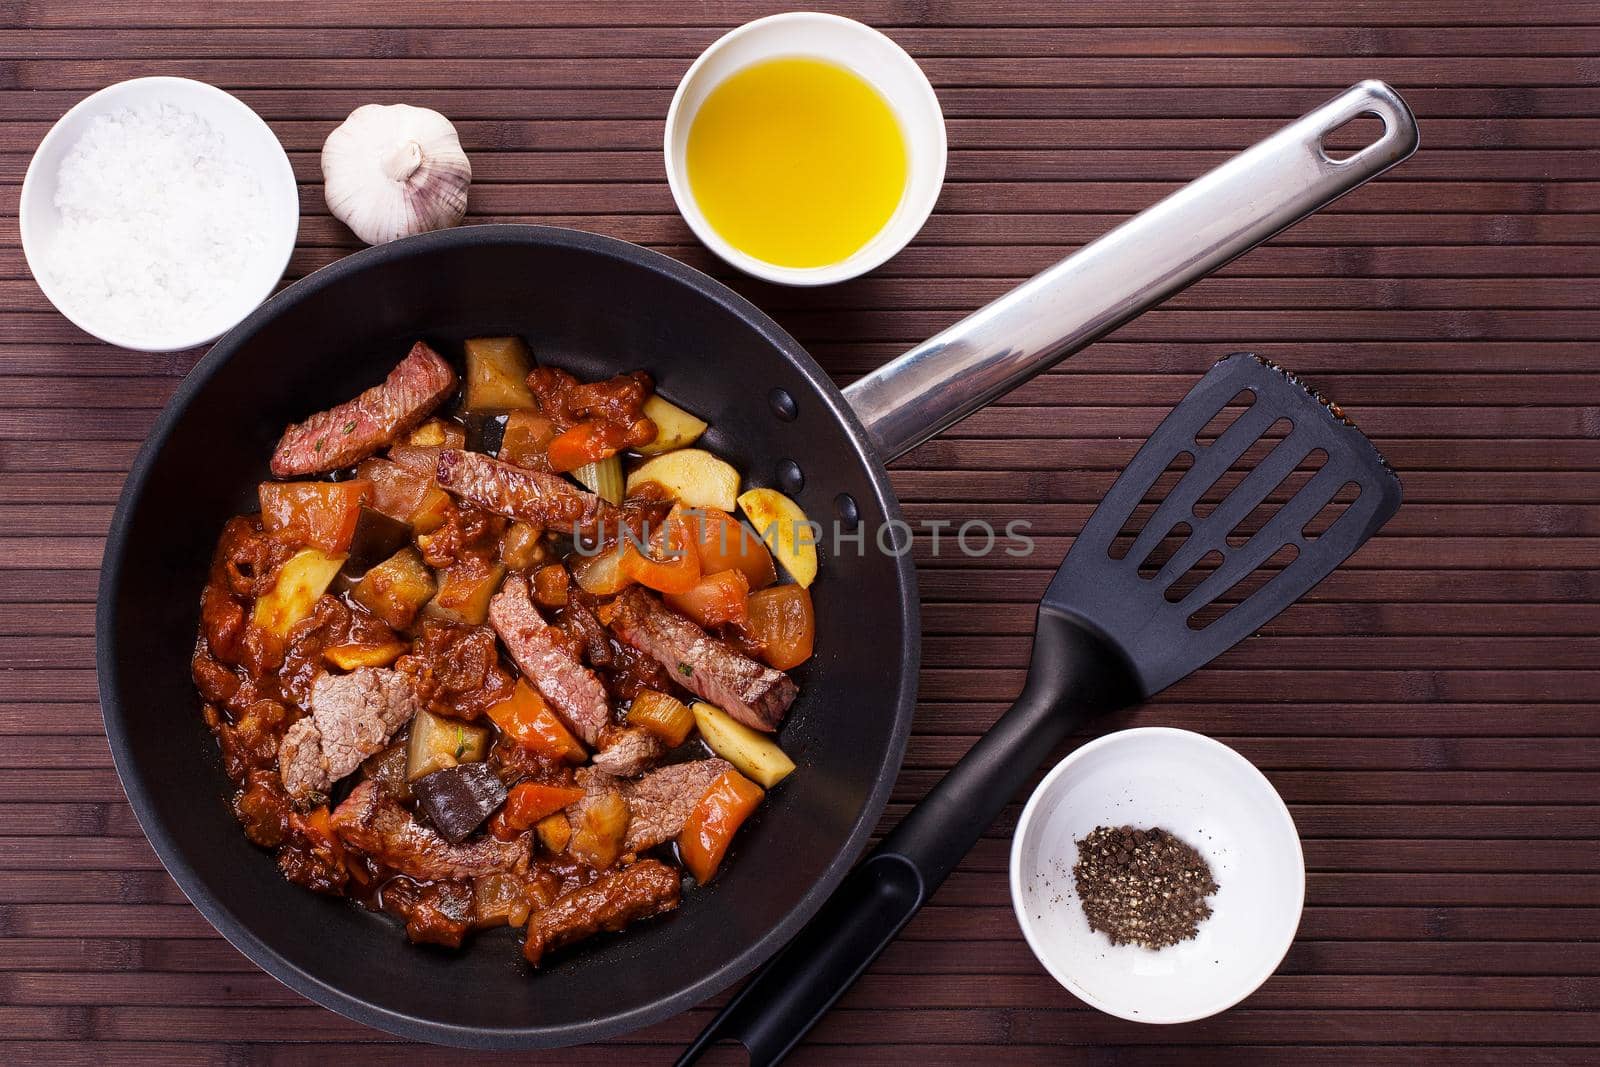 Braised veal with eggplant and other vegetables in a pan. Stock image.